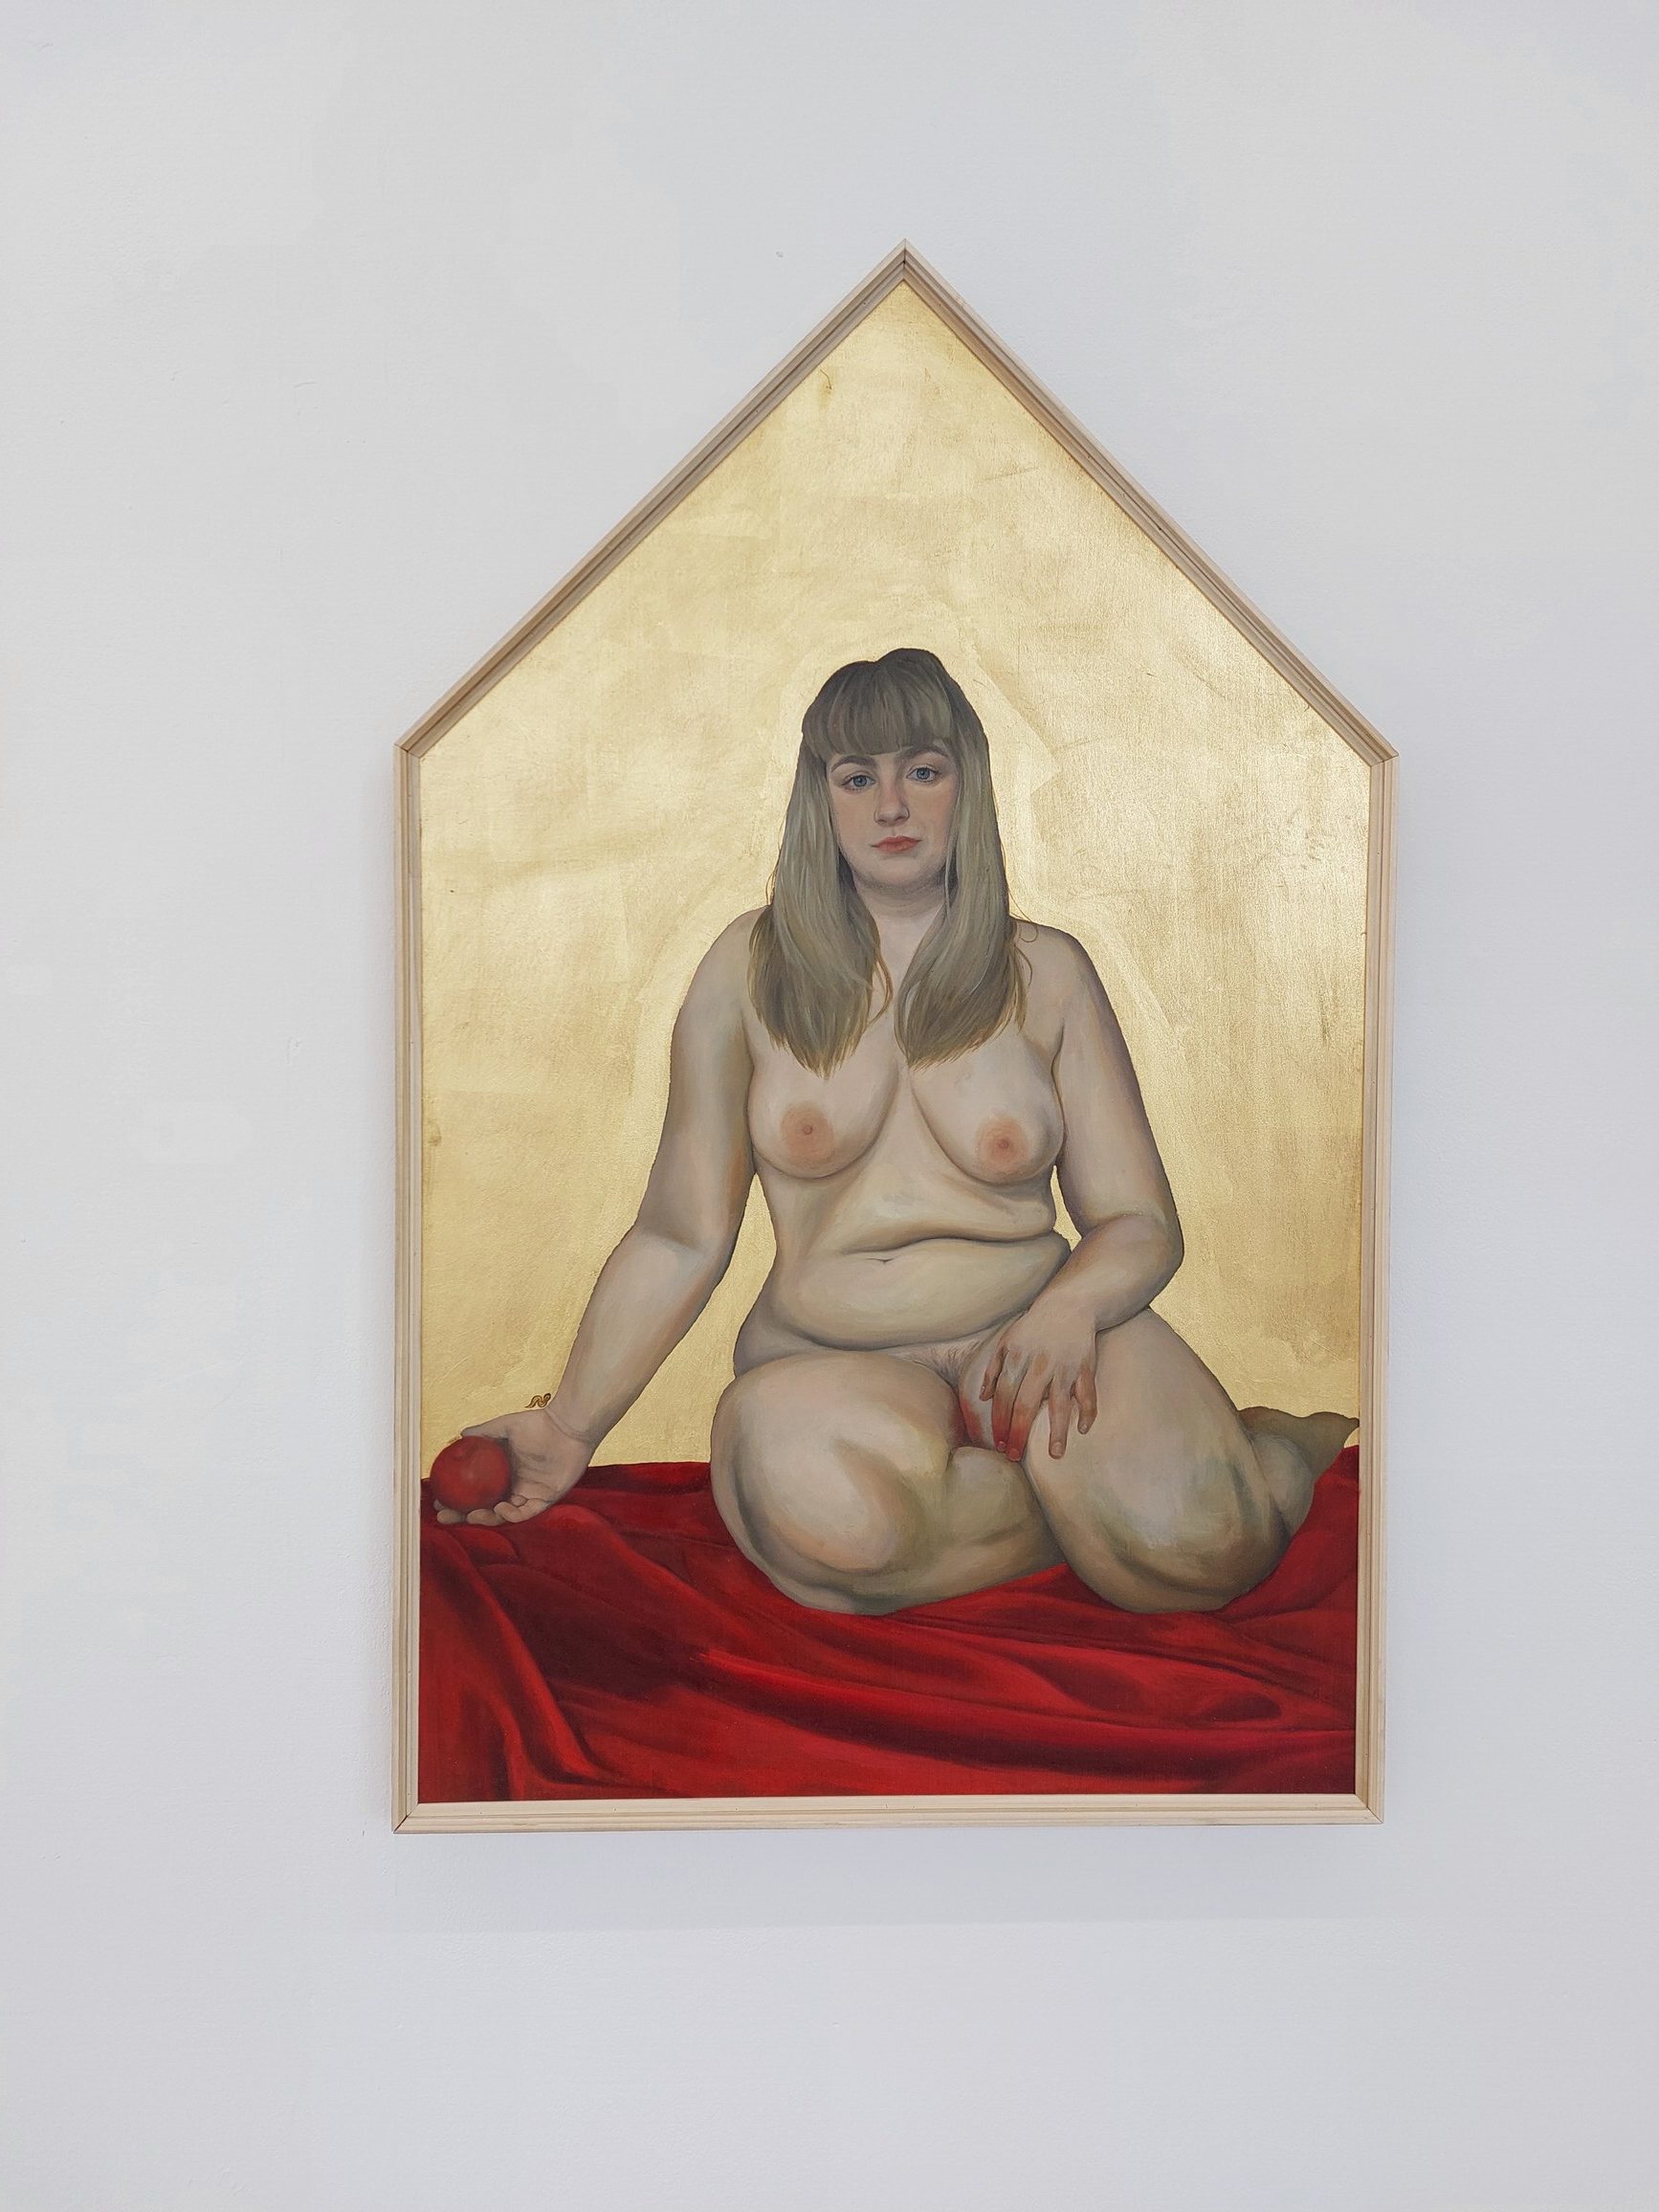 Oil painting of a blonde, nude female figure as the biblical Eve, holding an apple in one hand with blood on the other and on her thigh, sat on a rippling red sheet with a solid gold background.